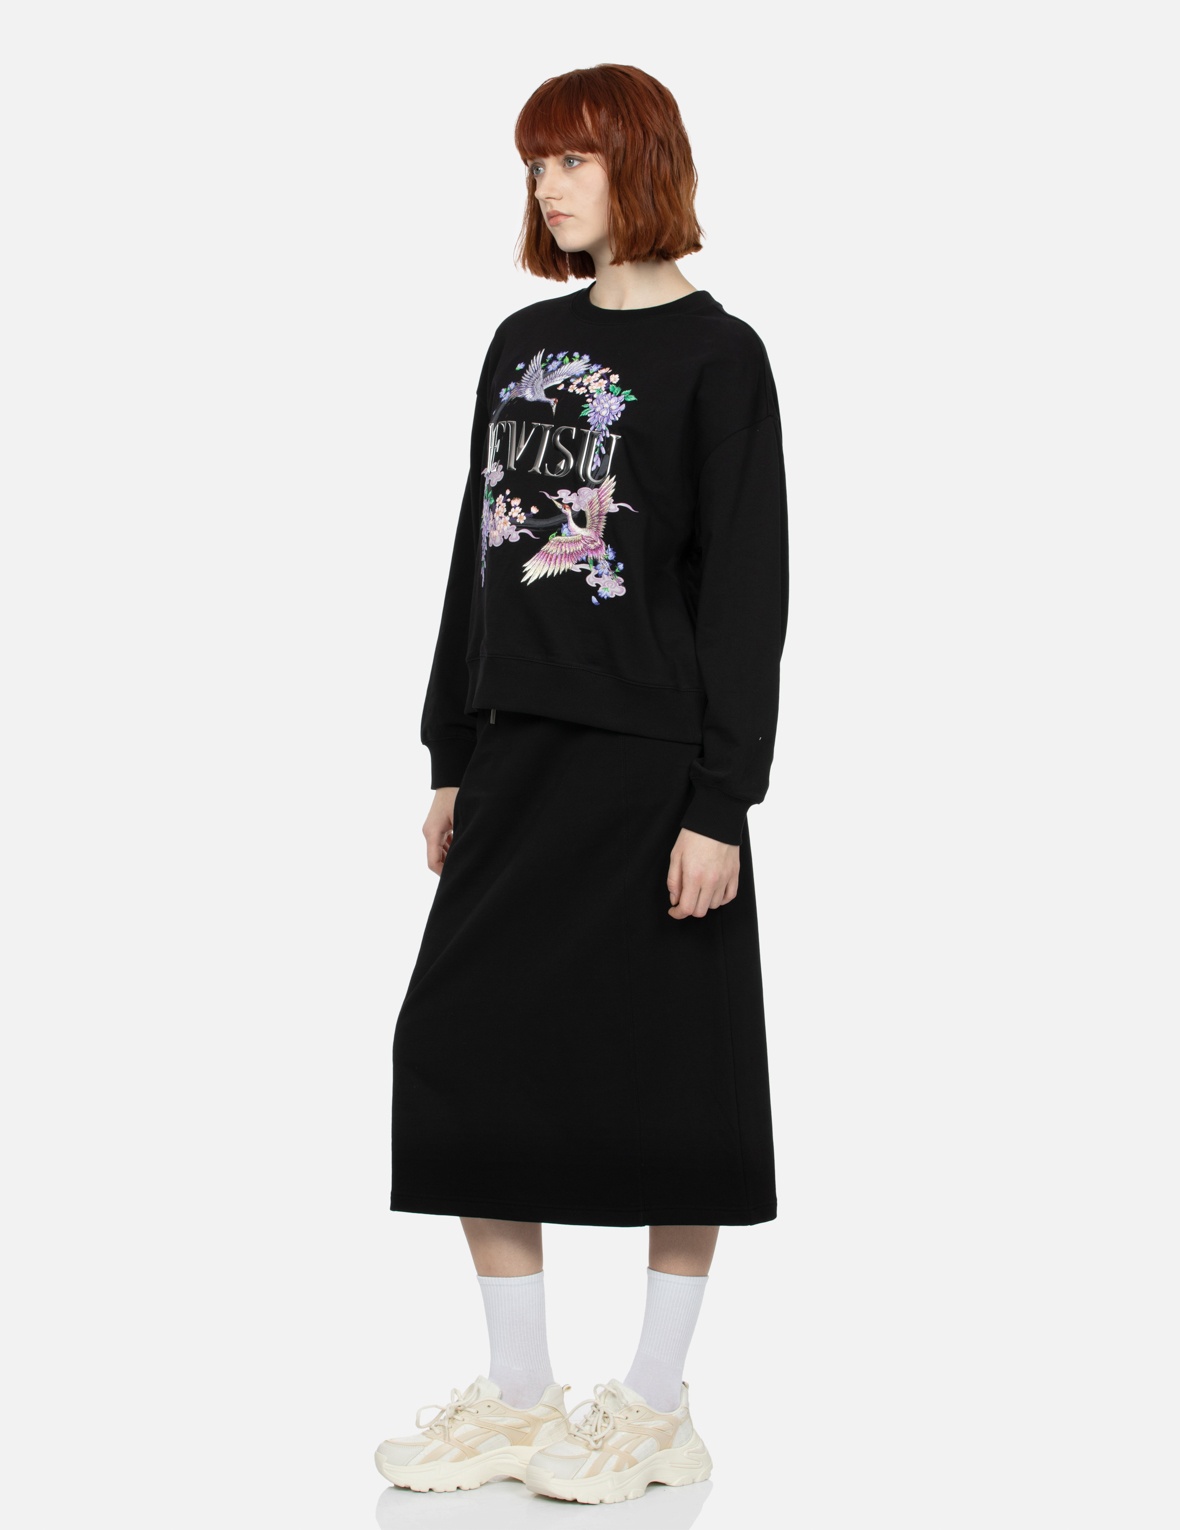 CRANES AND FLORAL EMBROIDERY WITH LOGO PRINT OVERSIZED SWEATSHIRT - 3